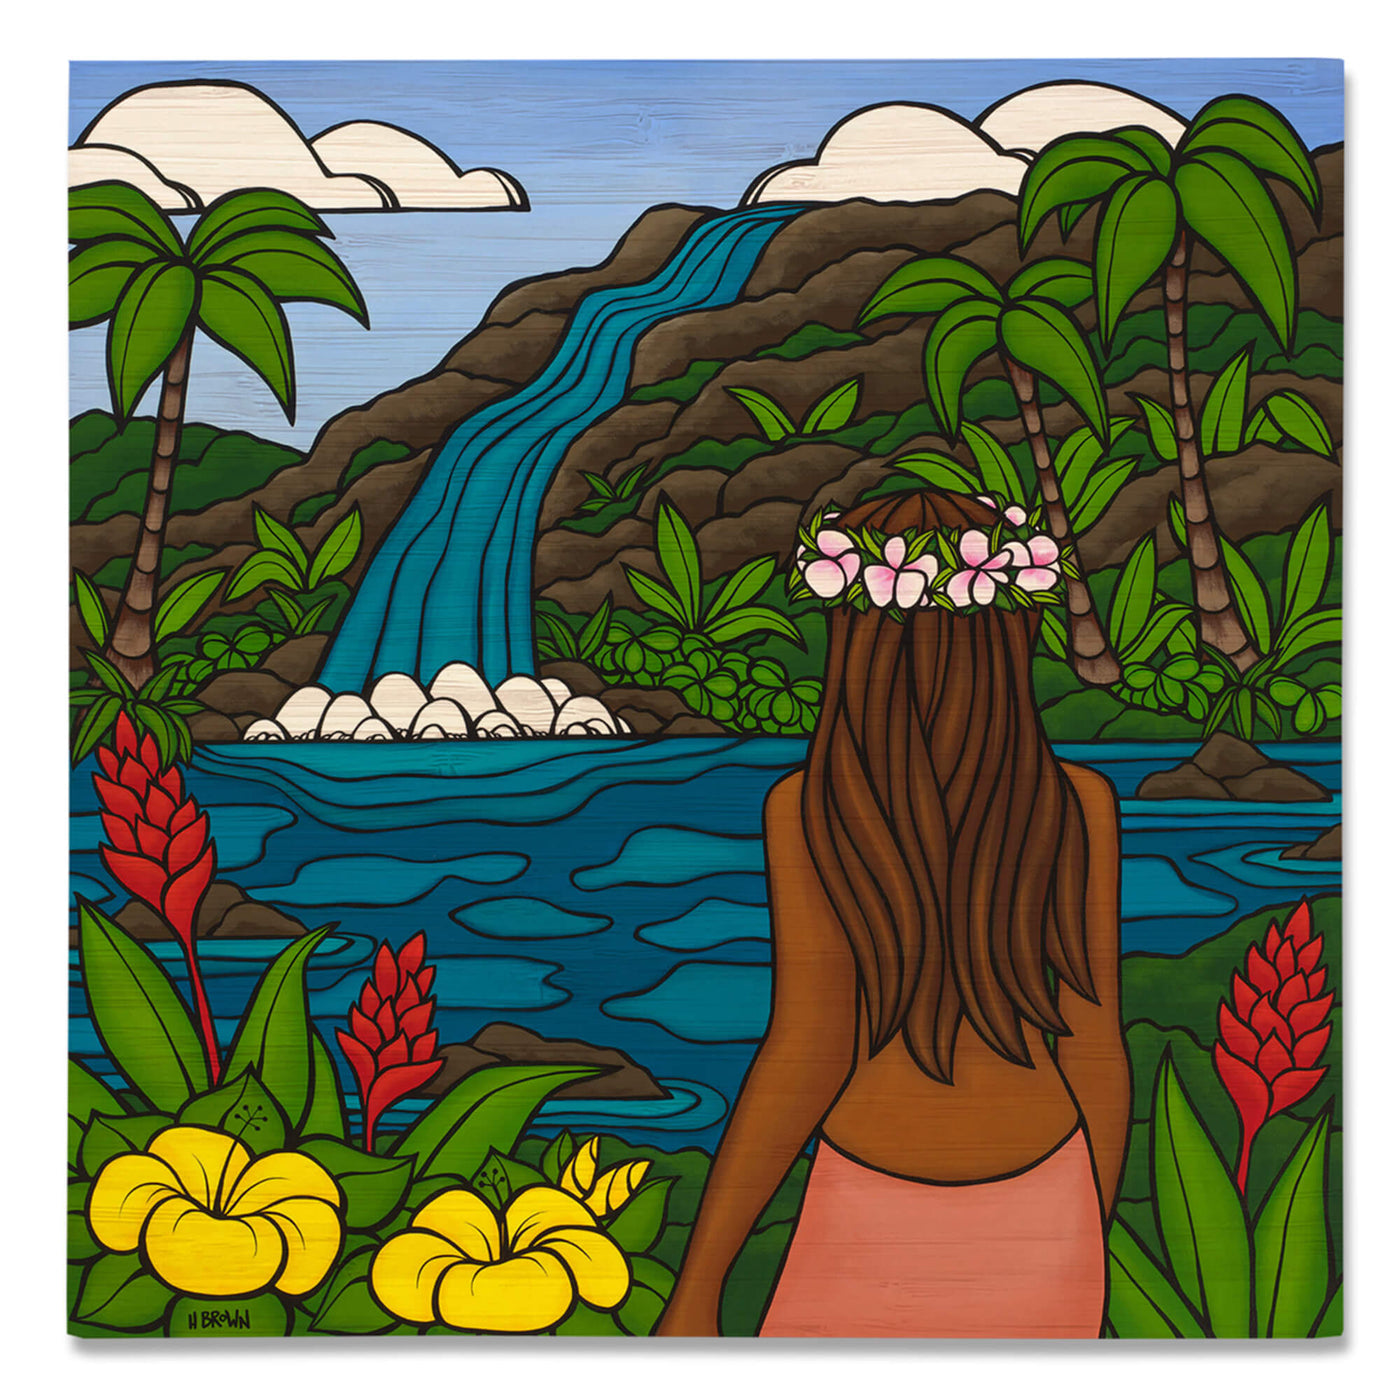 A bamboo print of  a local woman enjoying the waterfall view with colorful tropical flowers surrounding her by Hawaii surf artist Heather Brown